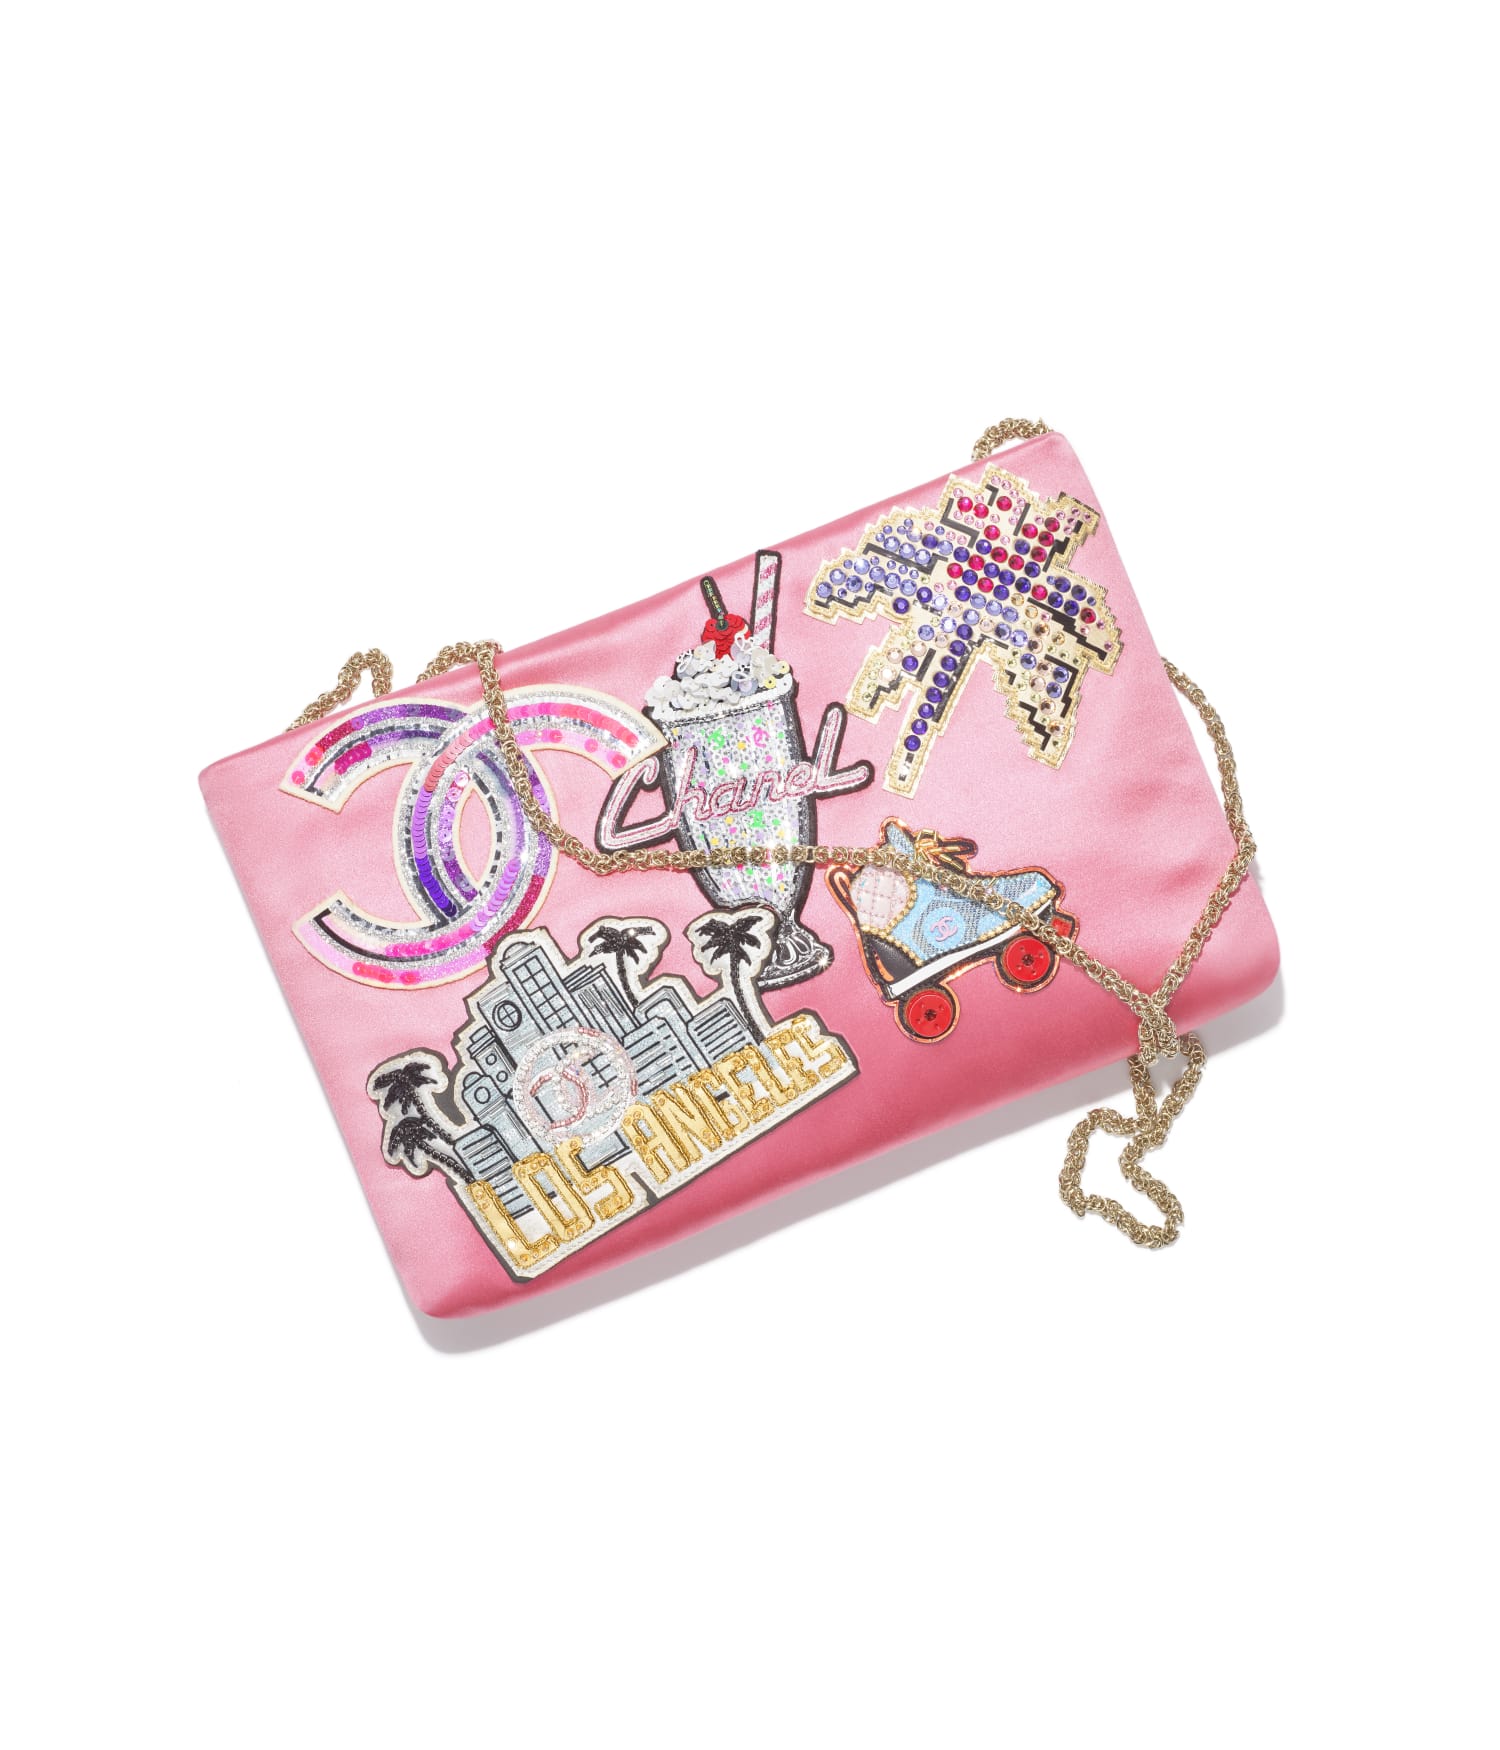 chanel_clutch-bag-in-pink-satin-embroidered-with-sequins-glass-beads-and-metal-as4630-b15063-nt681-hd-LD